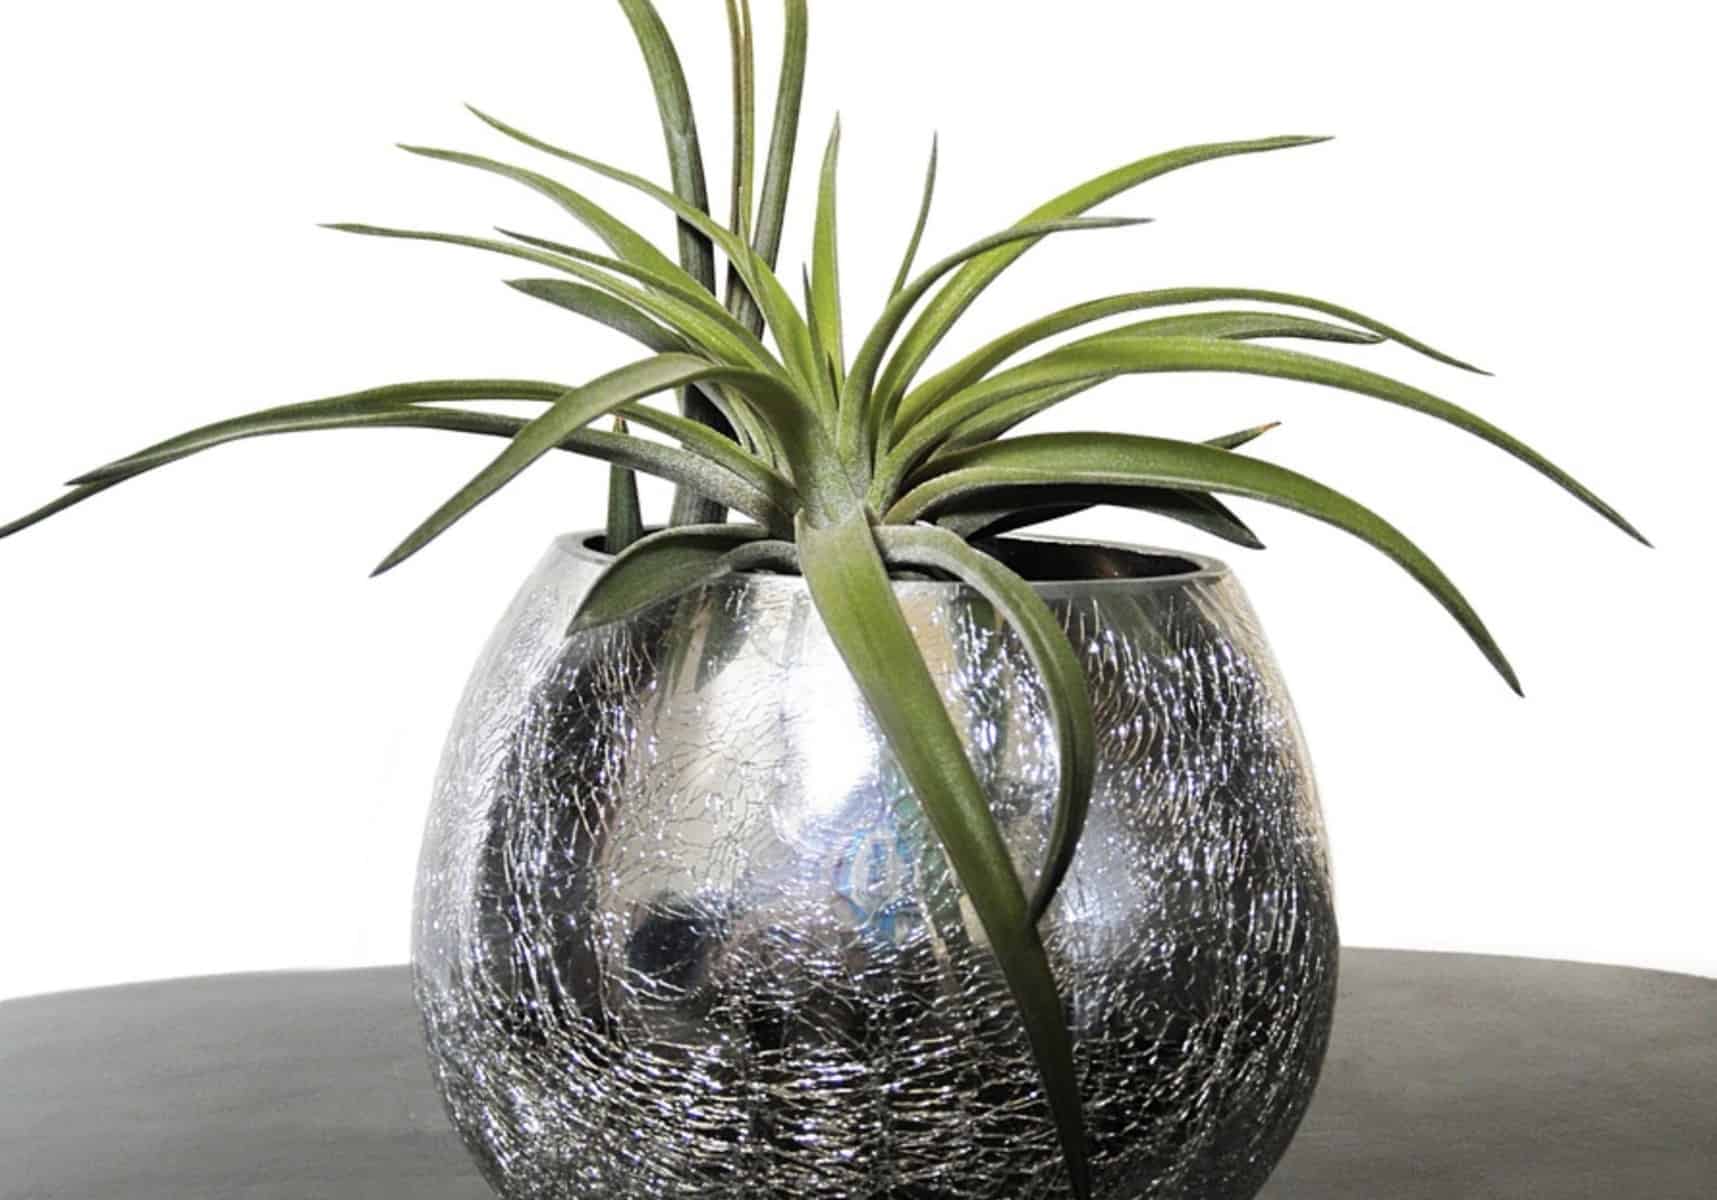 15 Types of Air Plants to Brighten Up Your Home - MORFLORA